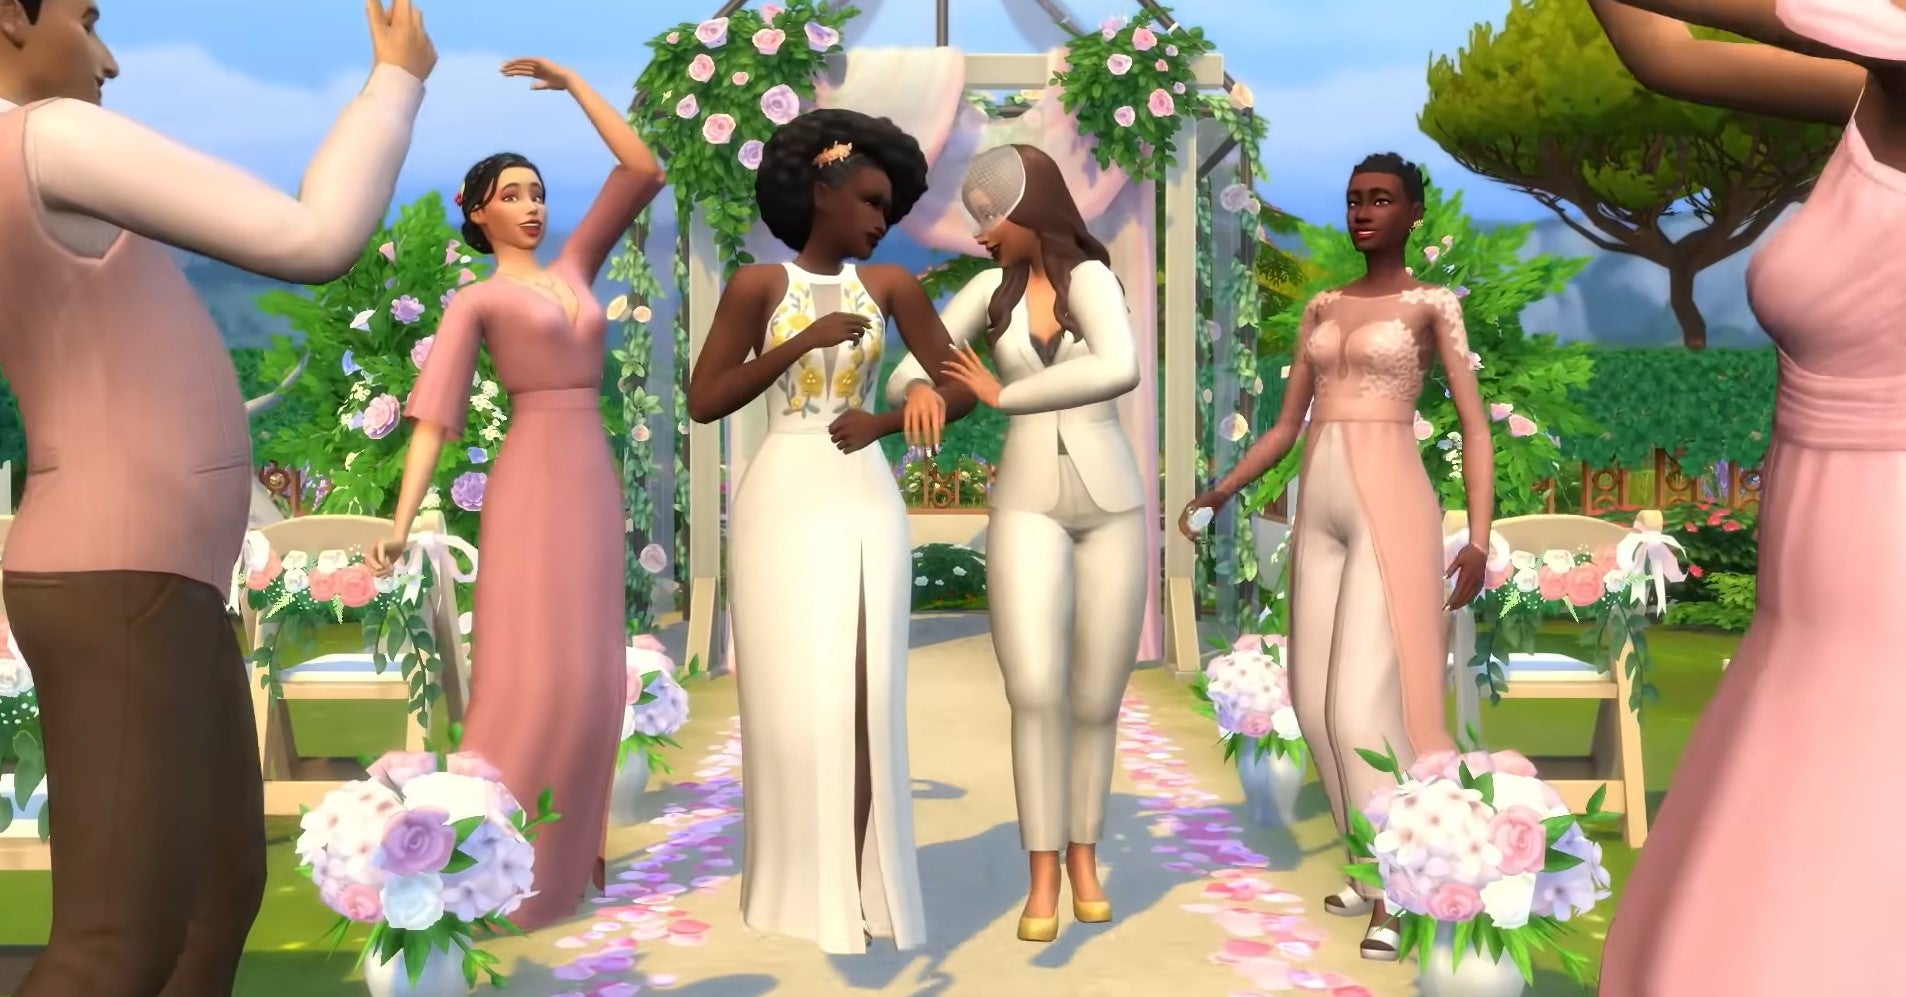 EA will not sell The Sims 4 wedding pack in Russia due to laws against same-sex marriage GamesIndustry.biz